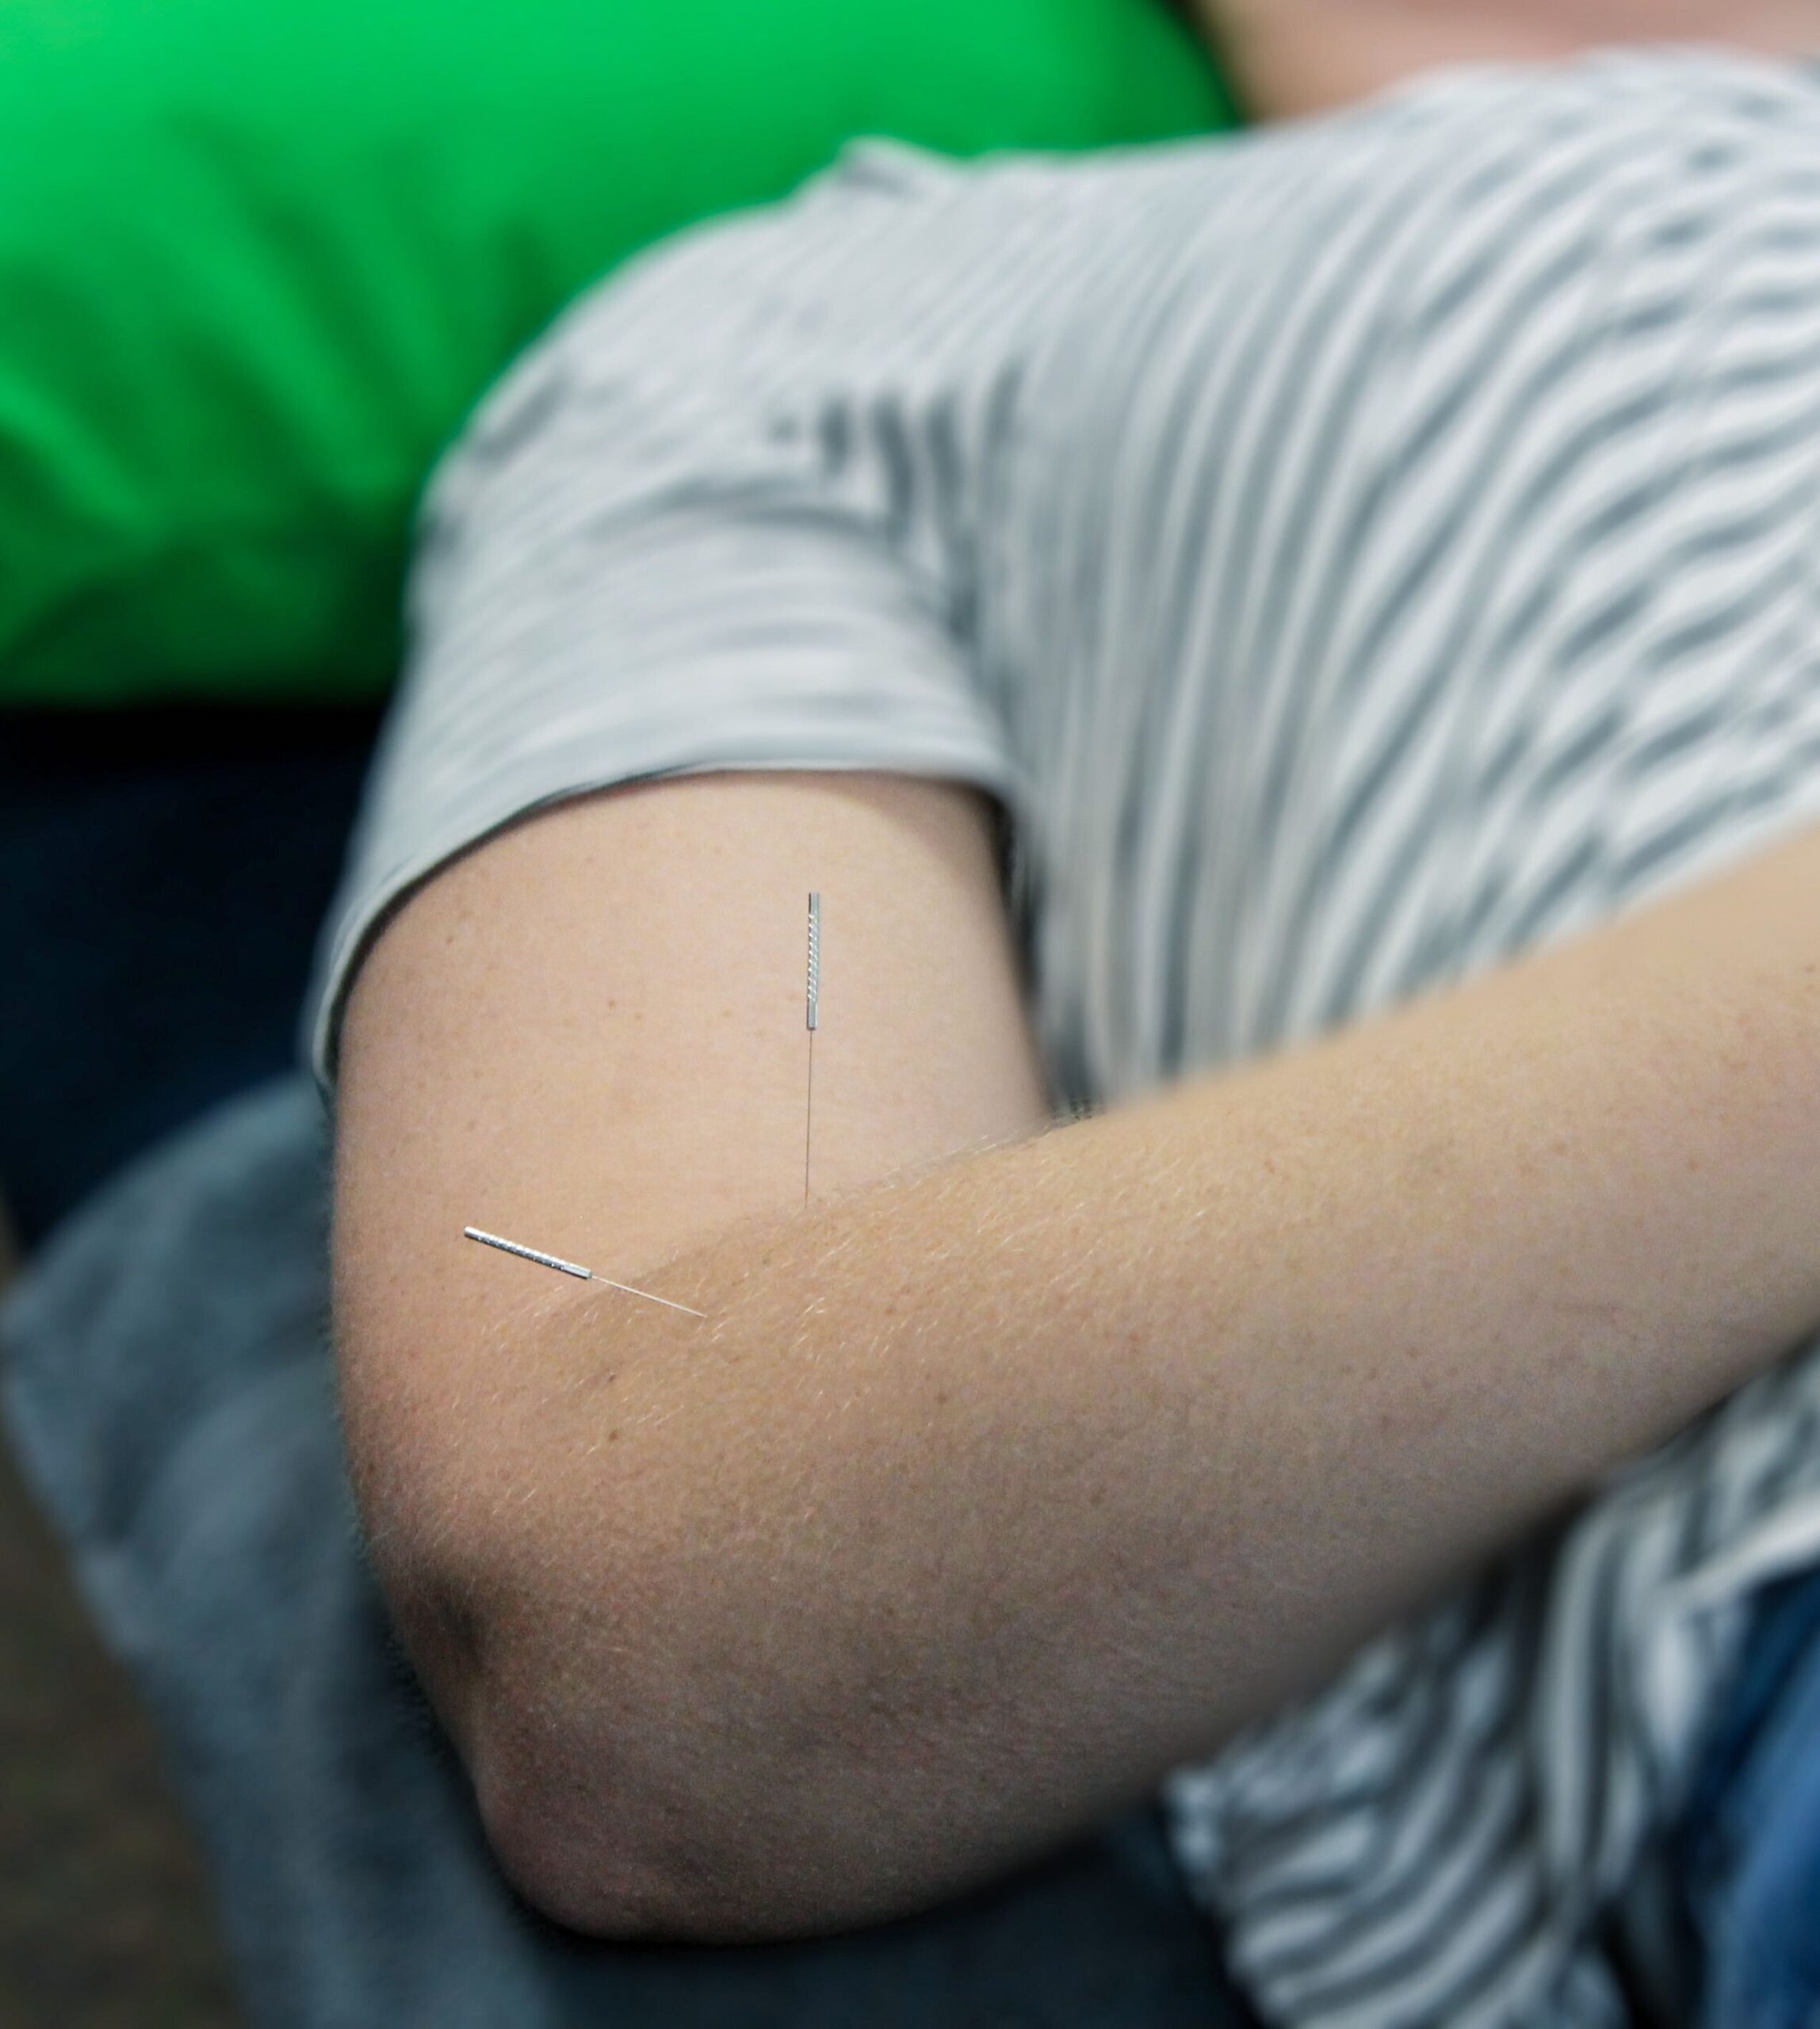 This image shows a client with tennis elbow receiving a dry needling treatment. There are 2 dry needles just below the clients elbow.